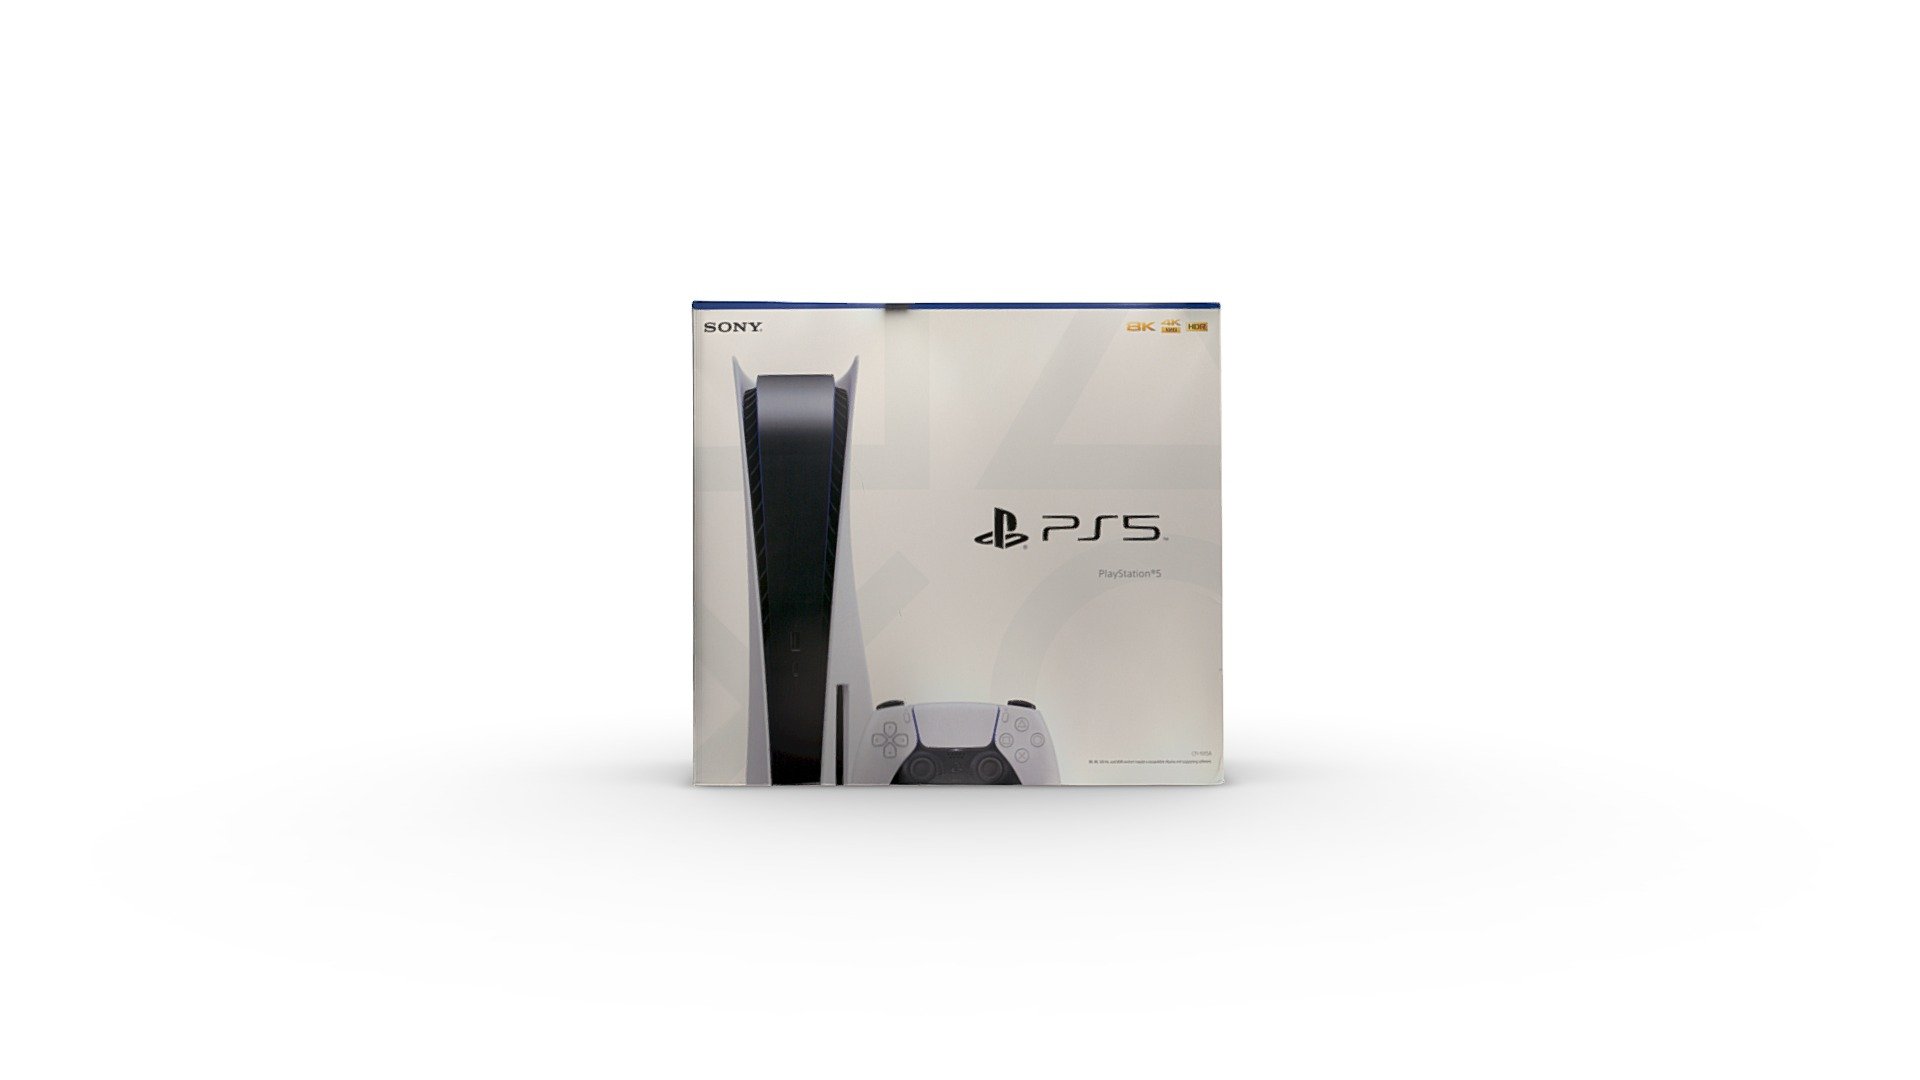 3D Scan of a PlayStation 5 box

PS5™ console Experience lightning fast loading with an ultra-high speed SSD, deeper immersion with support for haptic feedback, adaptive triggers and 3D Audio, and an all-new generation of incredible PlayStation games 3d model